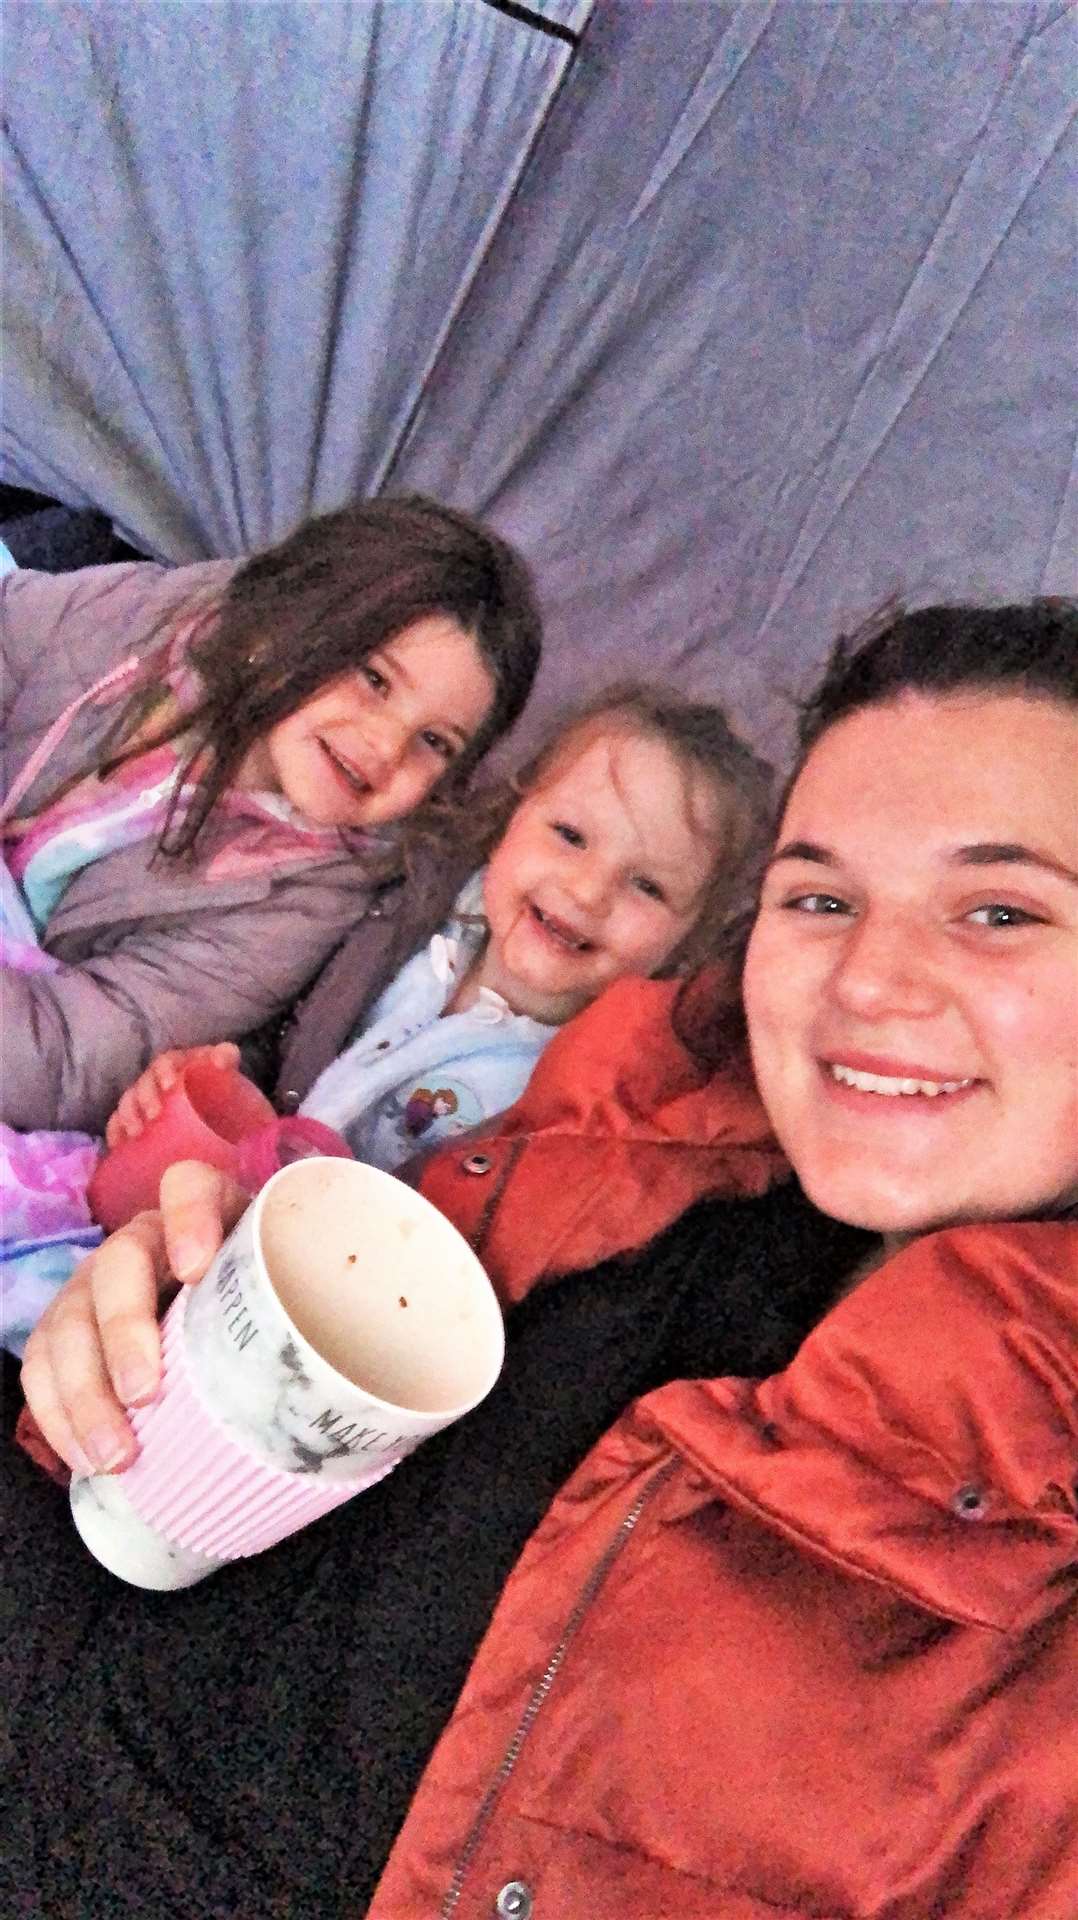 Hannah with her children Ferne and Lori in their tent at Reiss.